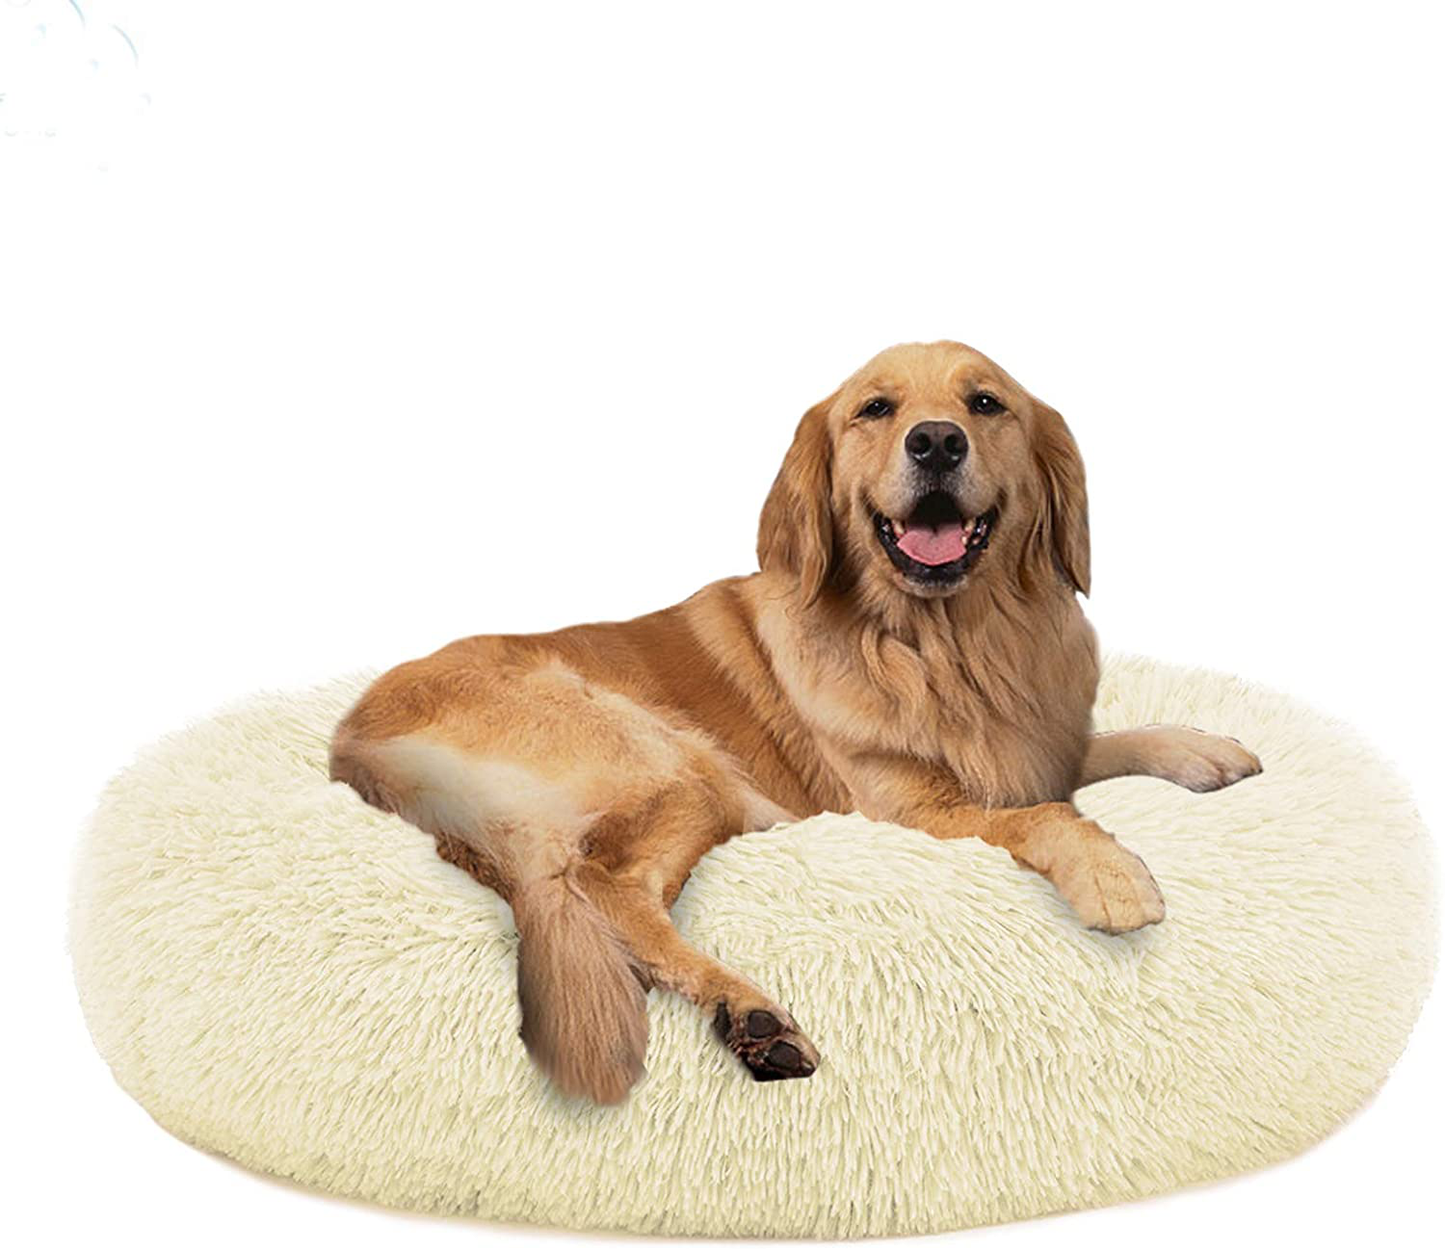 PUPPBUDD Calming Dog Bed Cat Bed Donut, Faux Fur Pet Bed Self-Warming Donut Cuddler, Comfortable round Plush Dog Beds for Large Medium Dogs and Cats (24"/32"/36"/44")